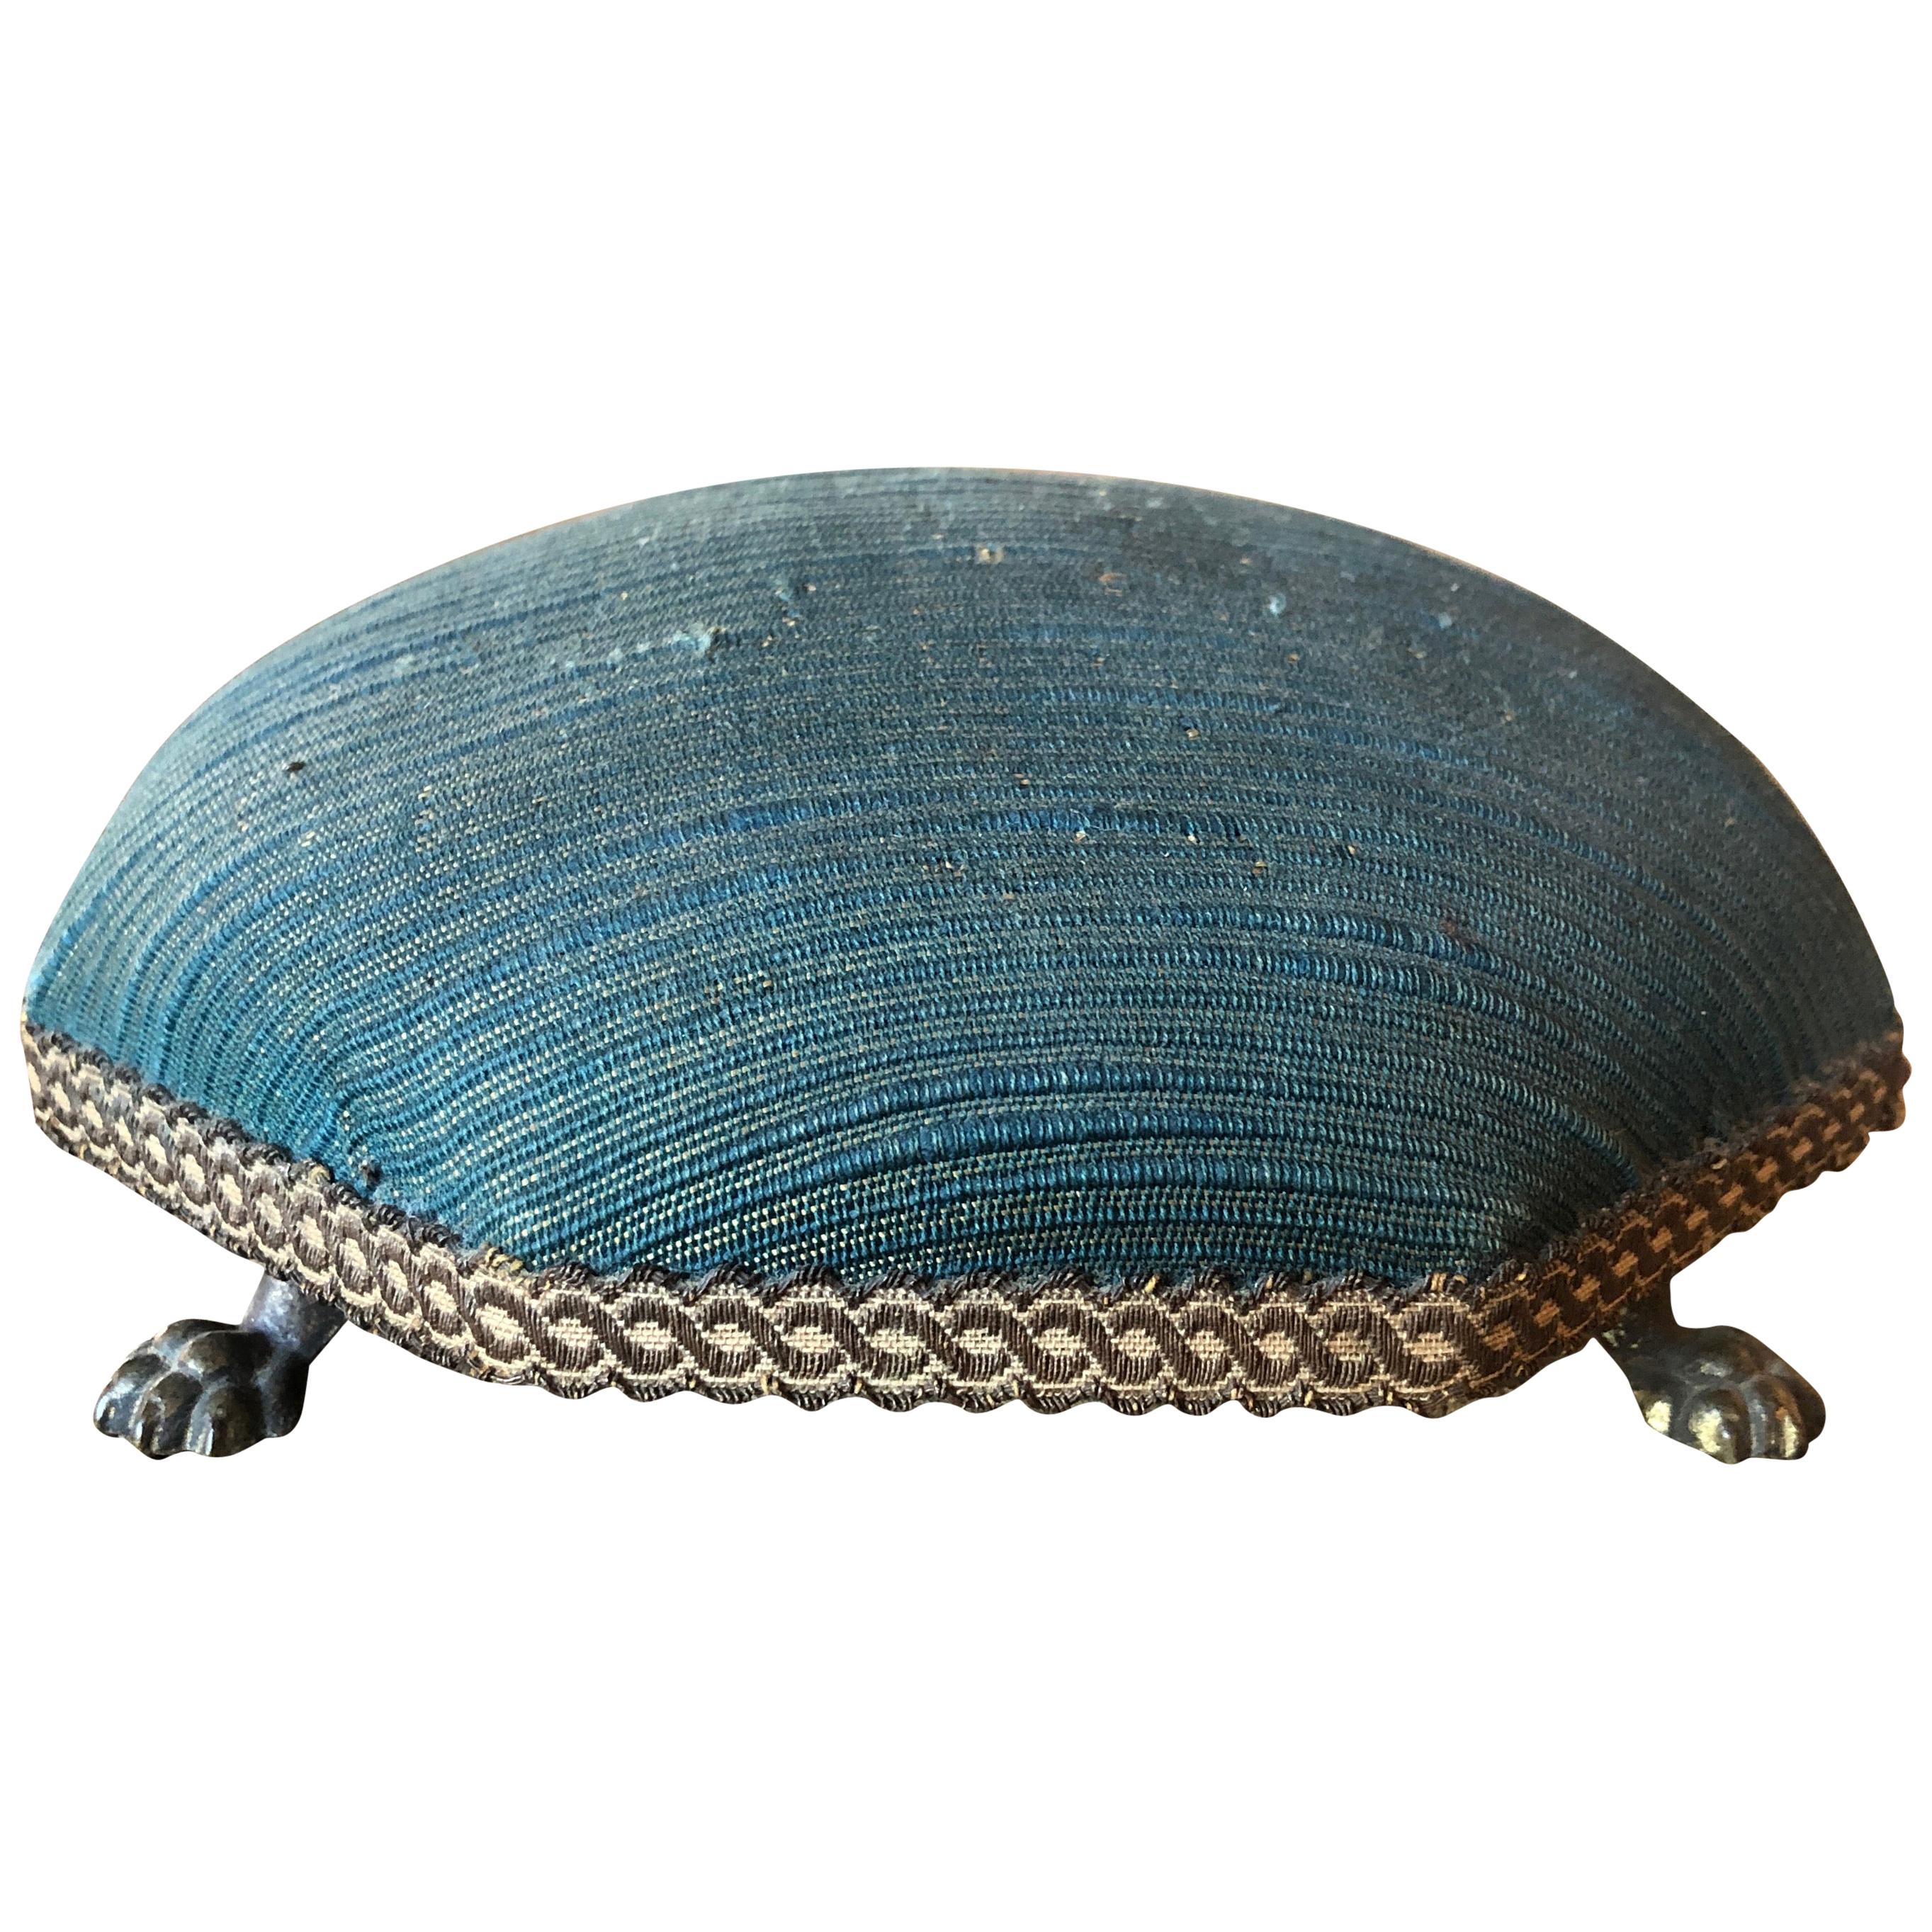 Early 20th Century Pin Cushion For Sale